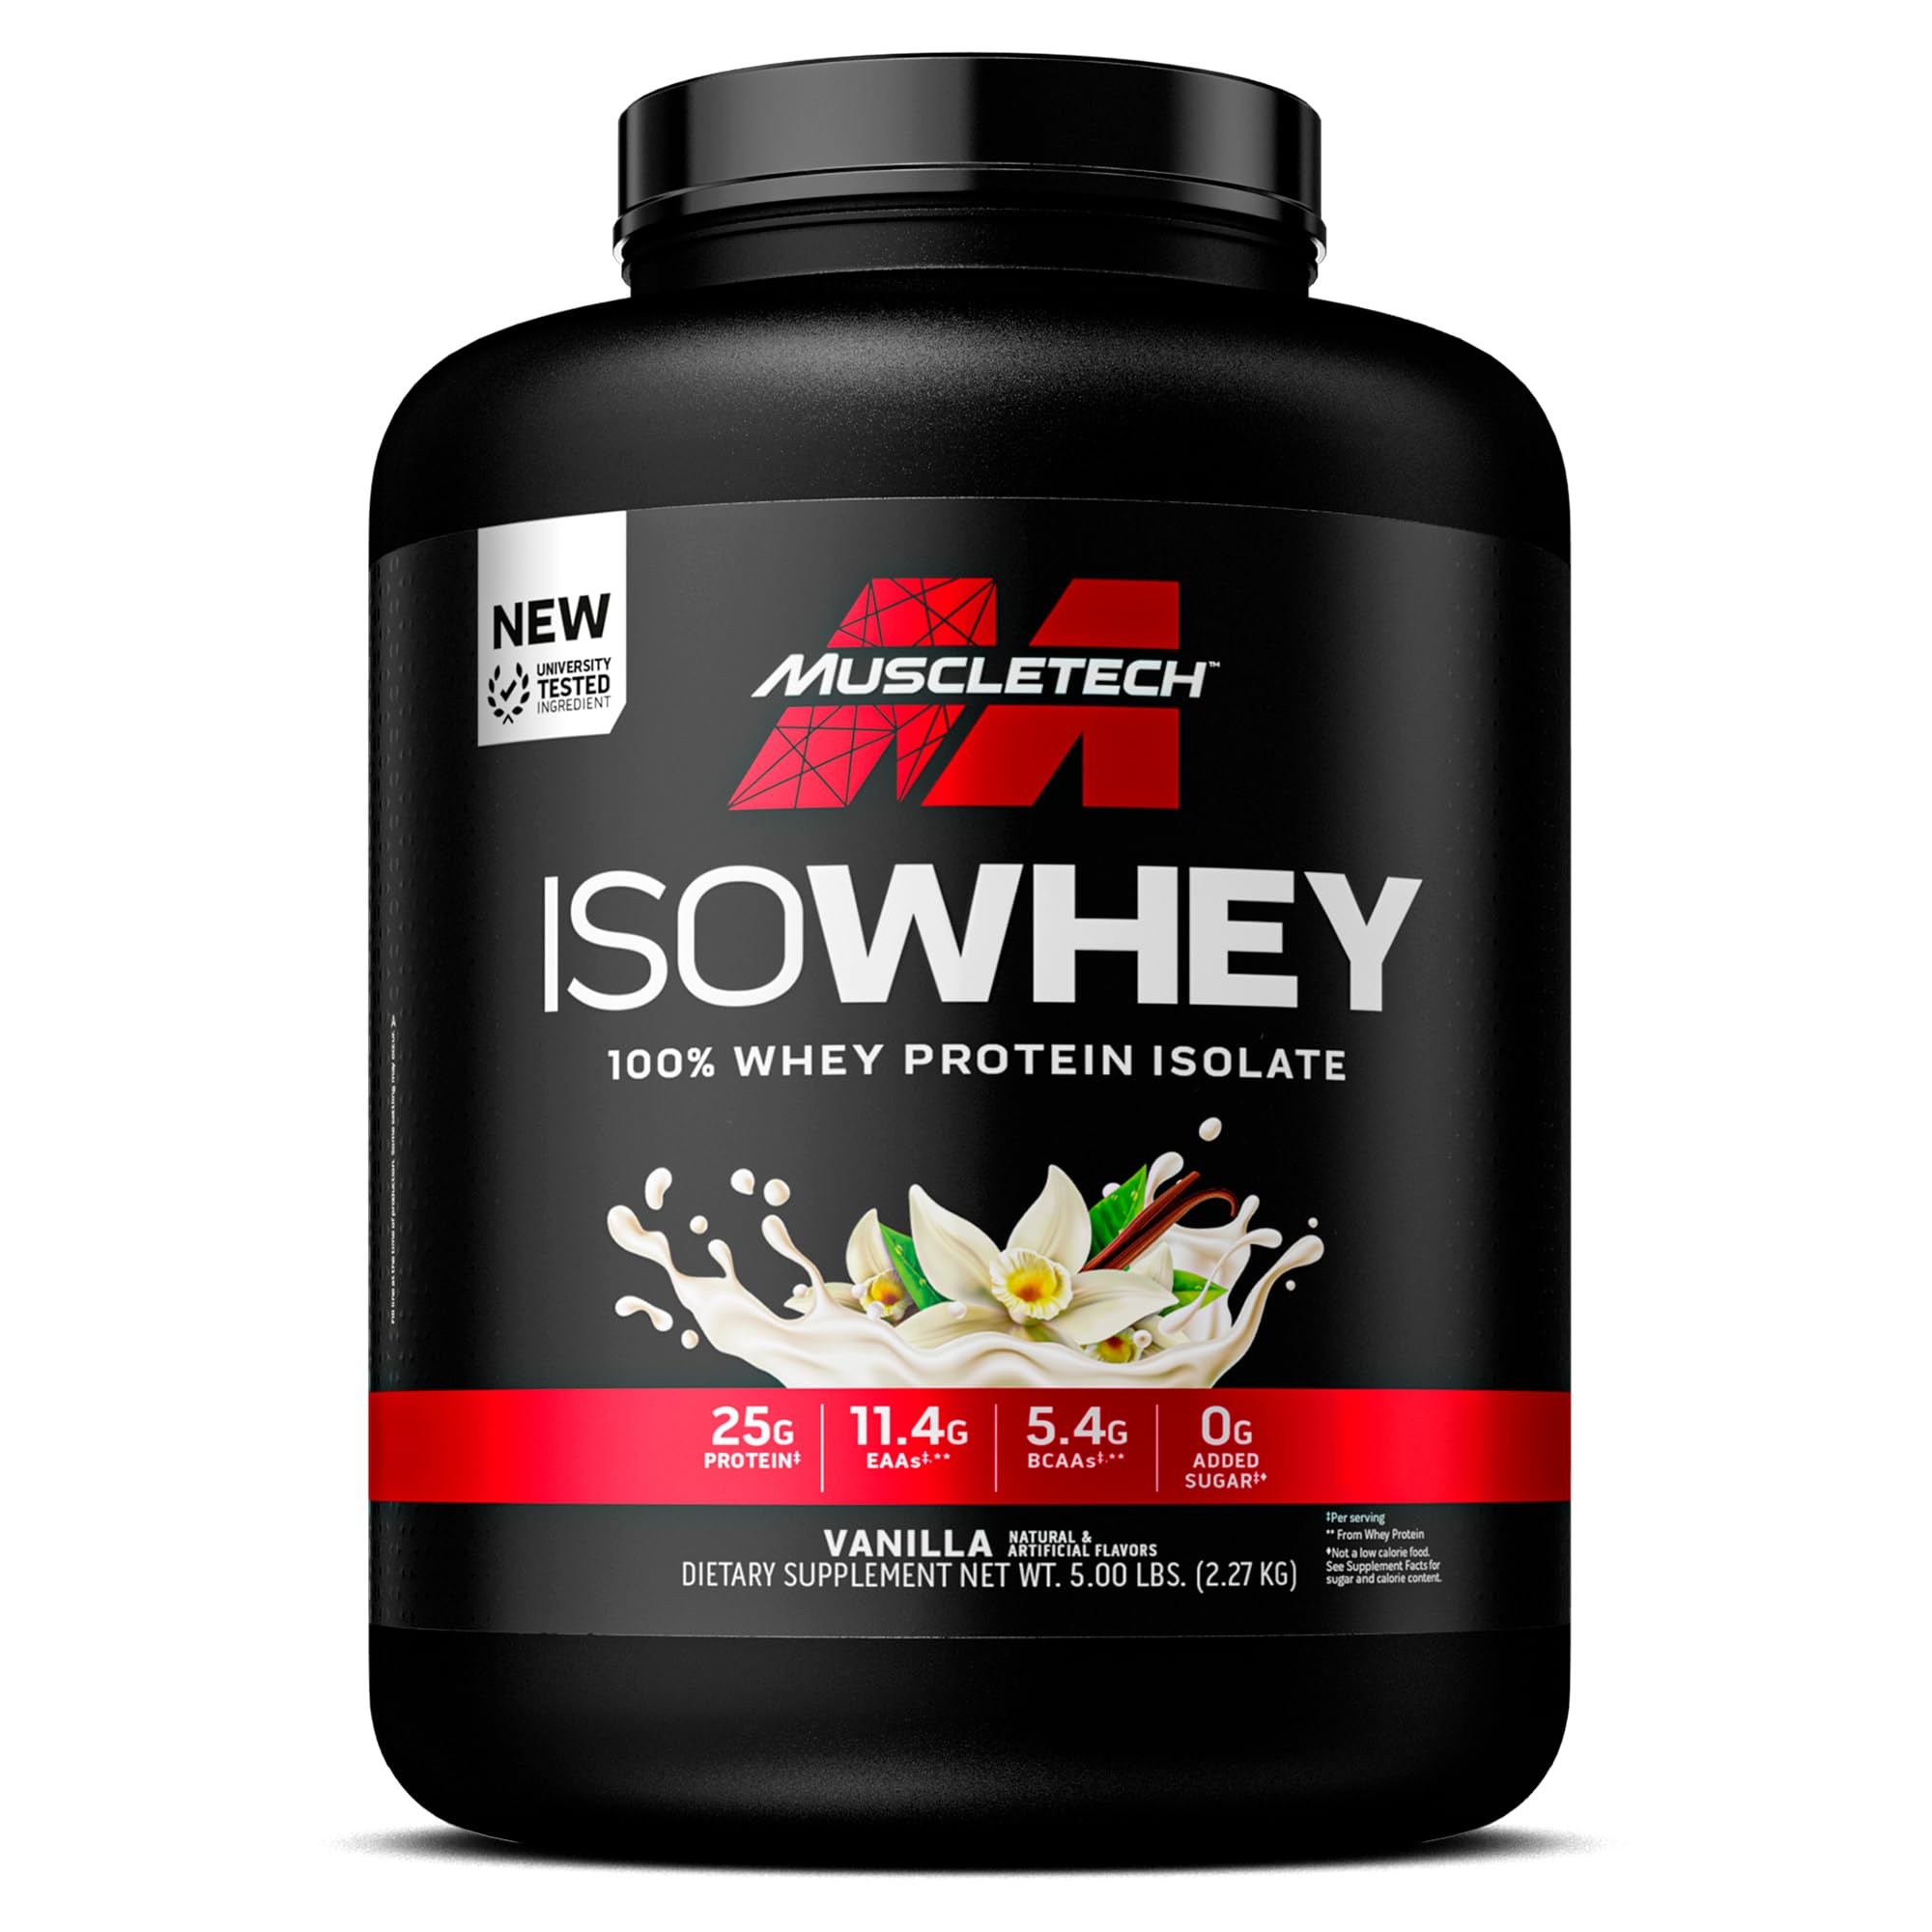 5-Lbs MuscleTech IsoWhey Whey Protein Isolate Powder (Vanilla) $49 w/ S&S + Free Shipping